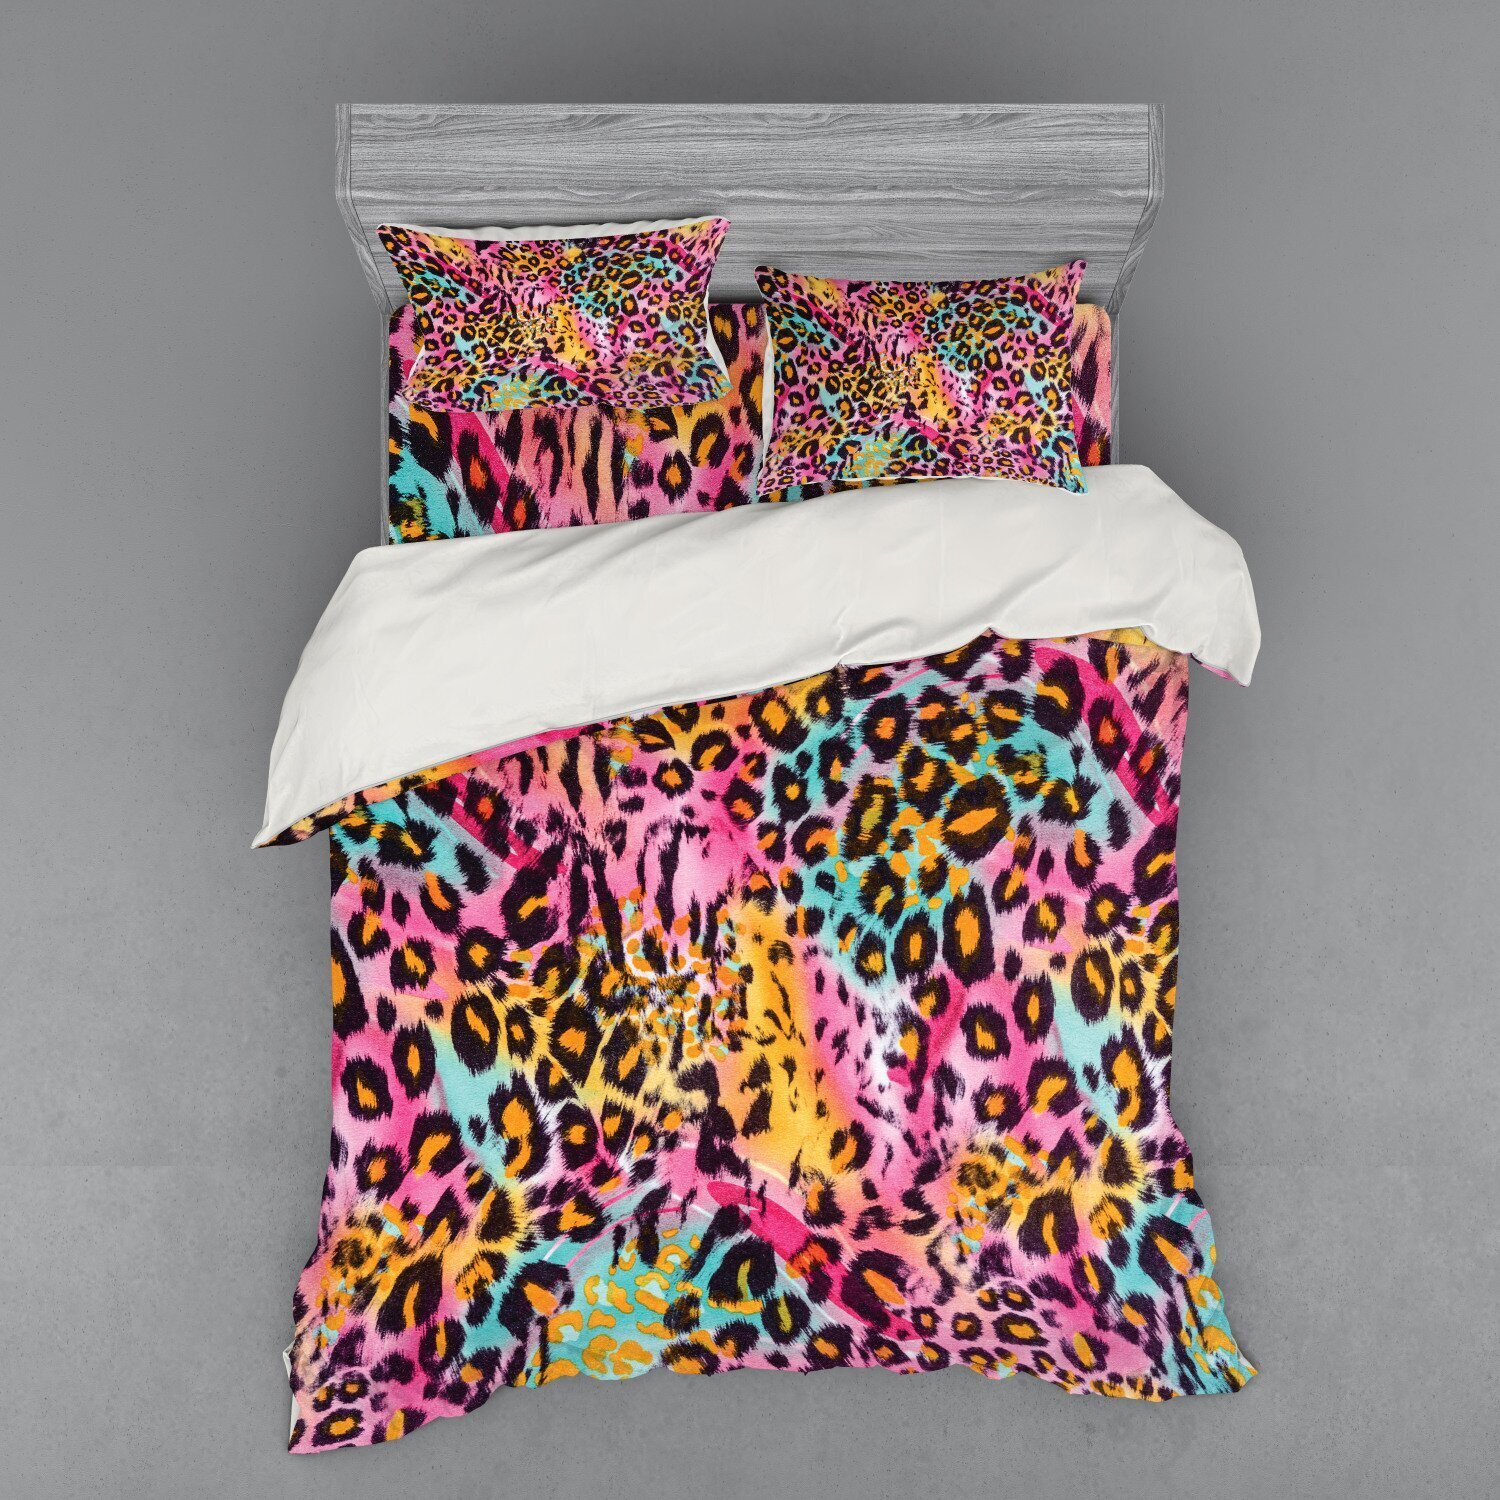 Vibrant and Eye Catching Leopard Print Bedding